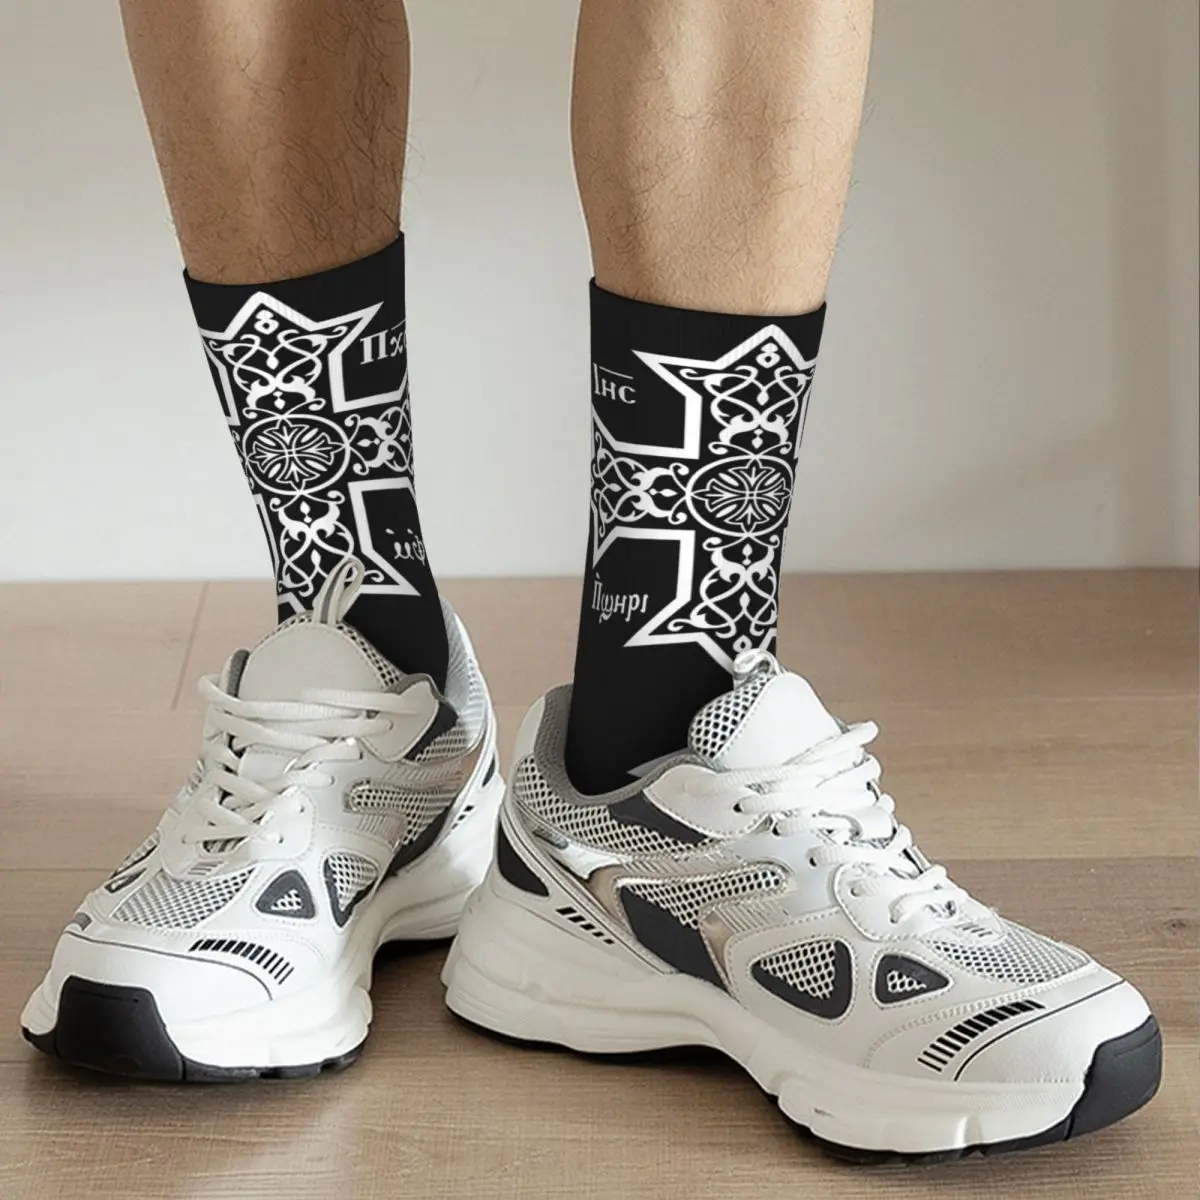 Crazy Design Coptic Orthodox Cross With Jesus Christ Basketball Socks Polyester Middle Tube Socks for Unisex Sweat Absorbing